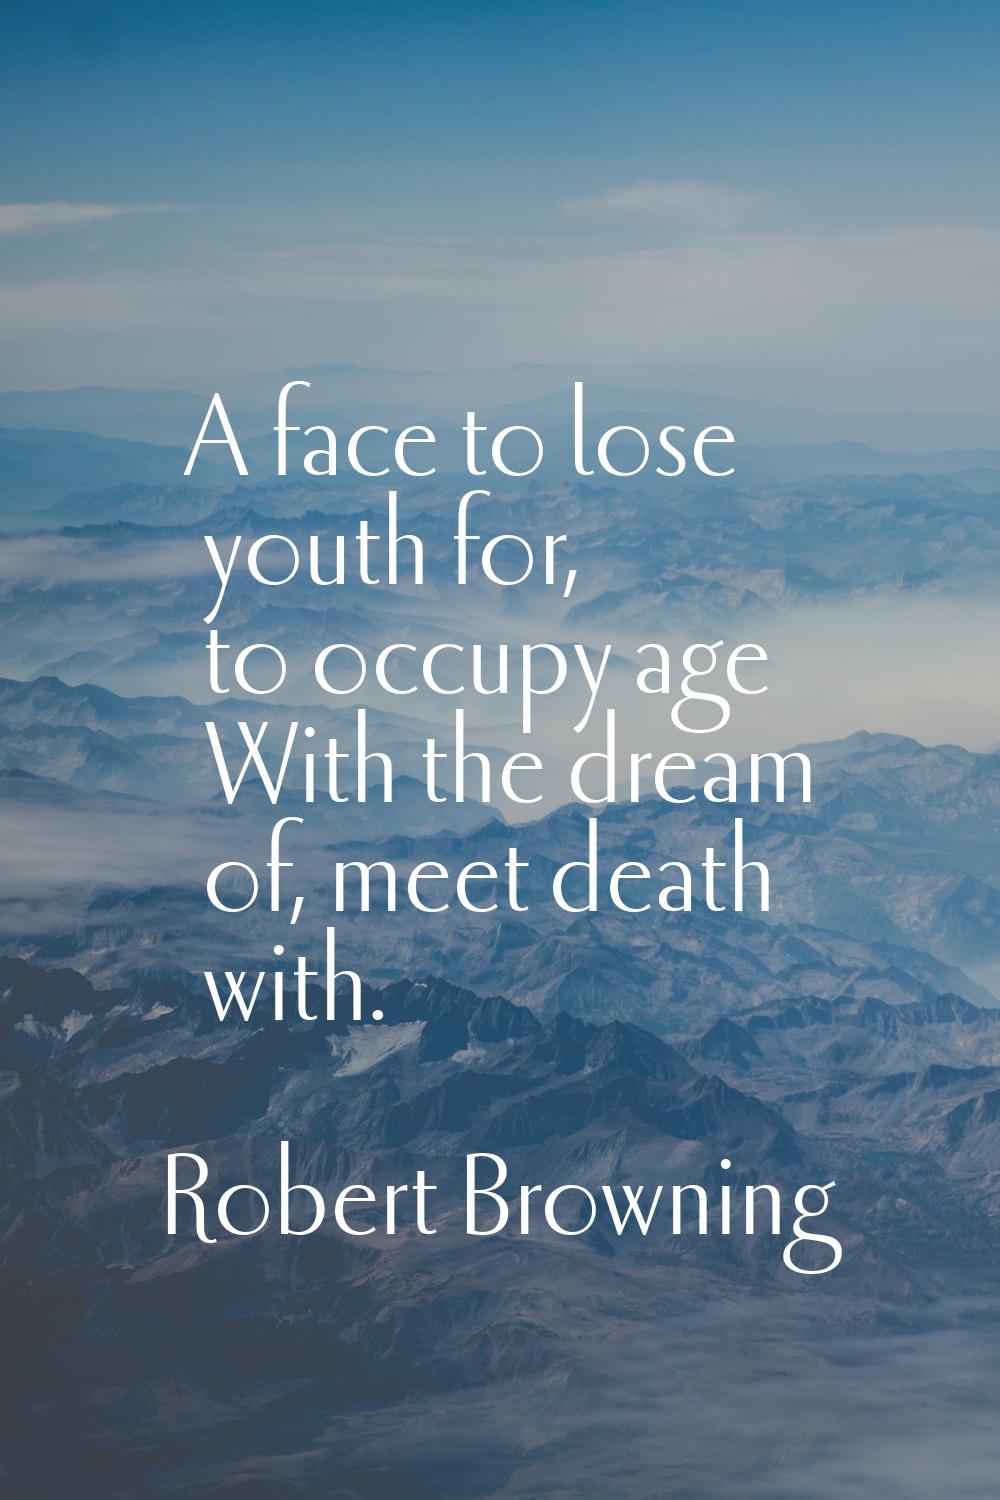 A face to lose youth for, to occupy age With the dream of, meet death with.